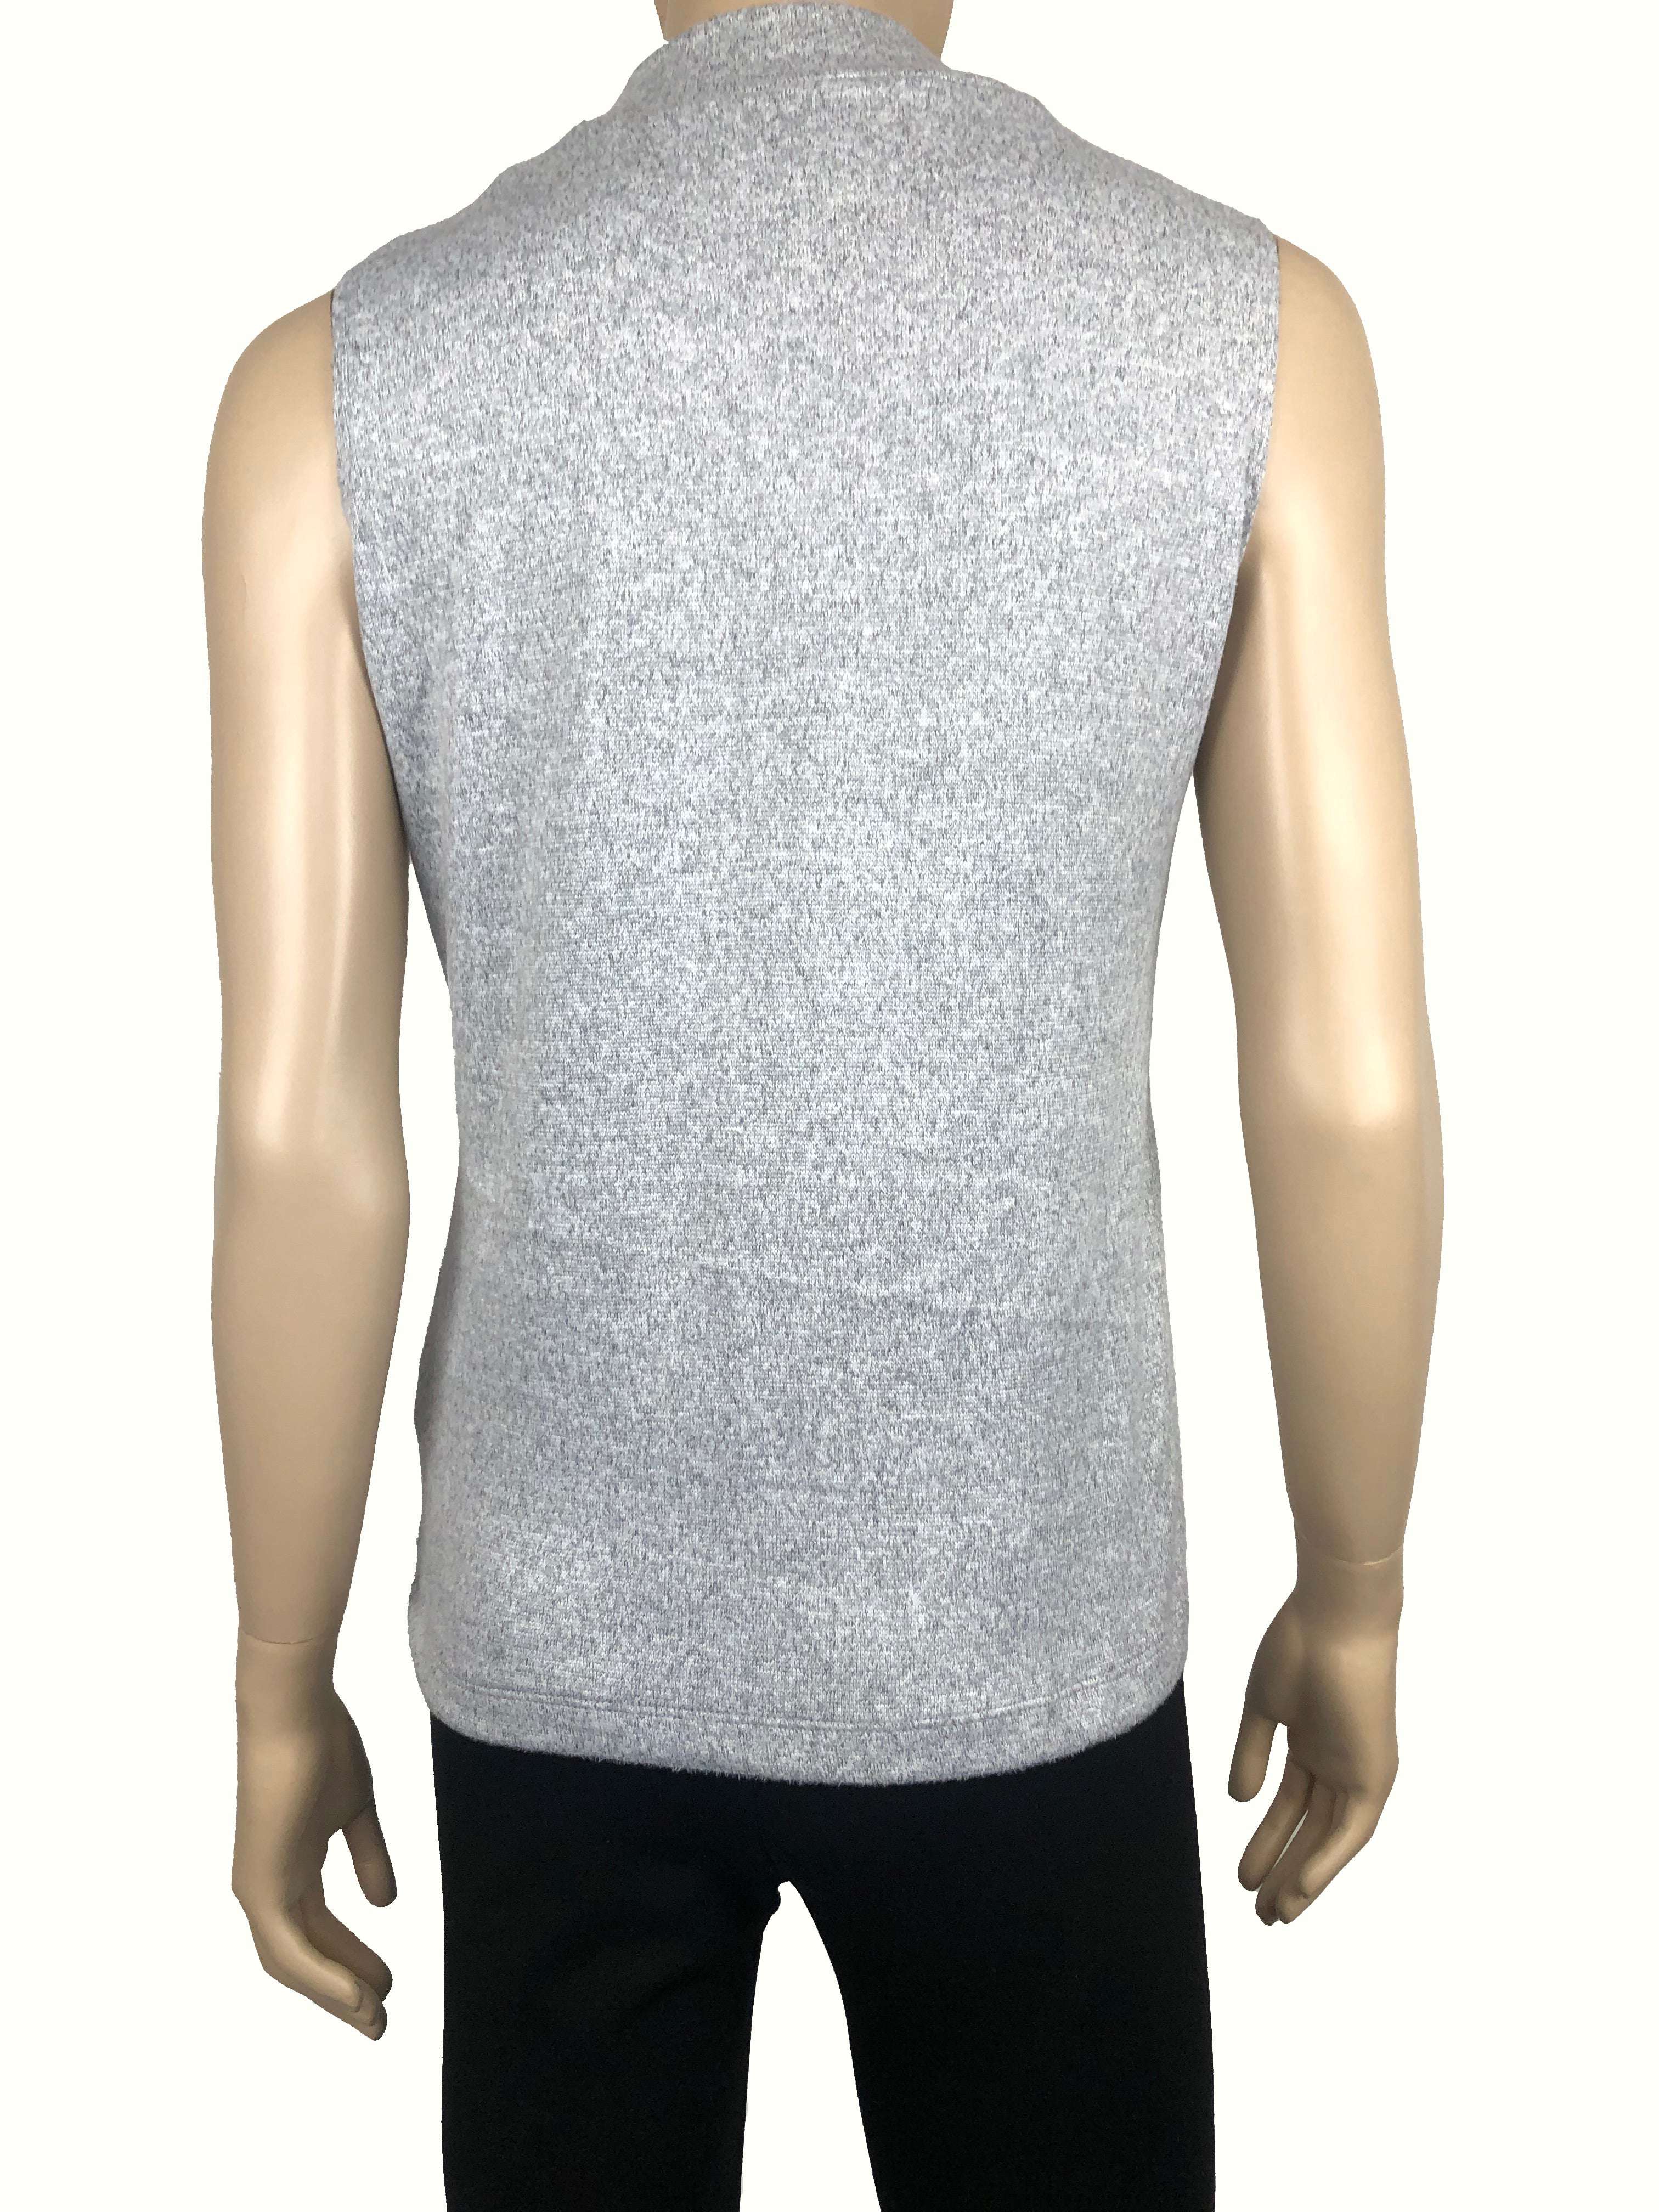 Women's Sleeveles Turtle Neck Silver Soft Knit Fabric - Made In Canada - Yvonne Marie - Yvonne Marie